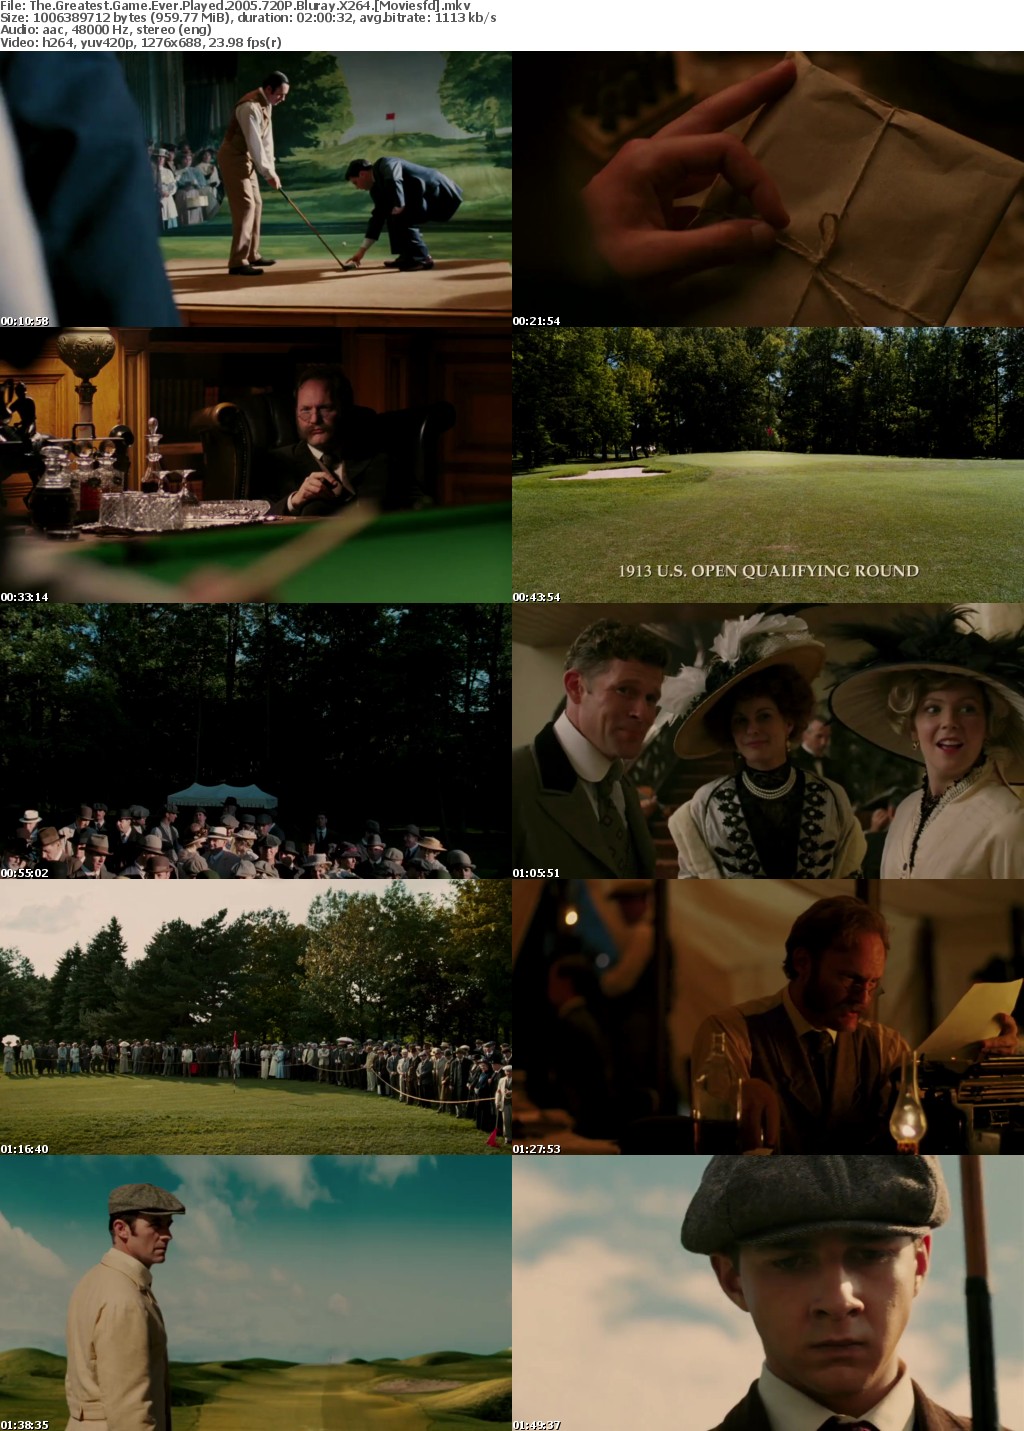 The Greatest Game Ever Played (2005) 720p BluRay X264 MoviesFD